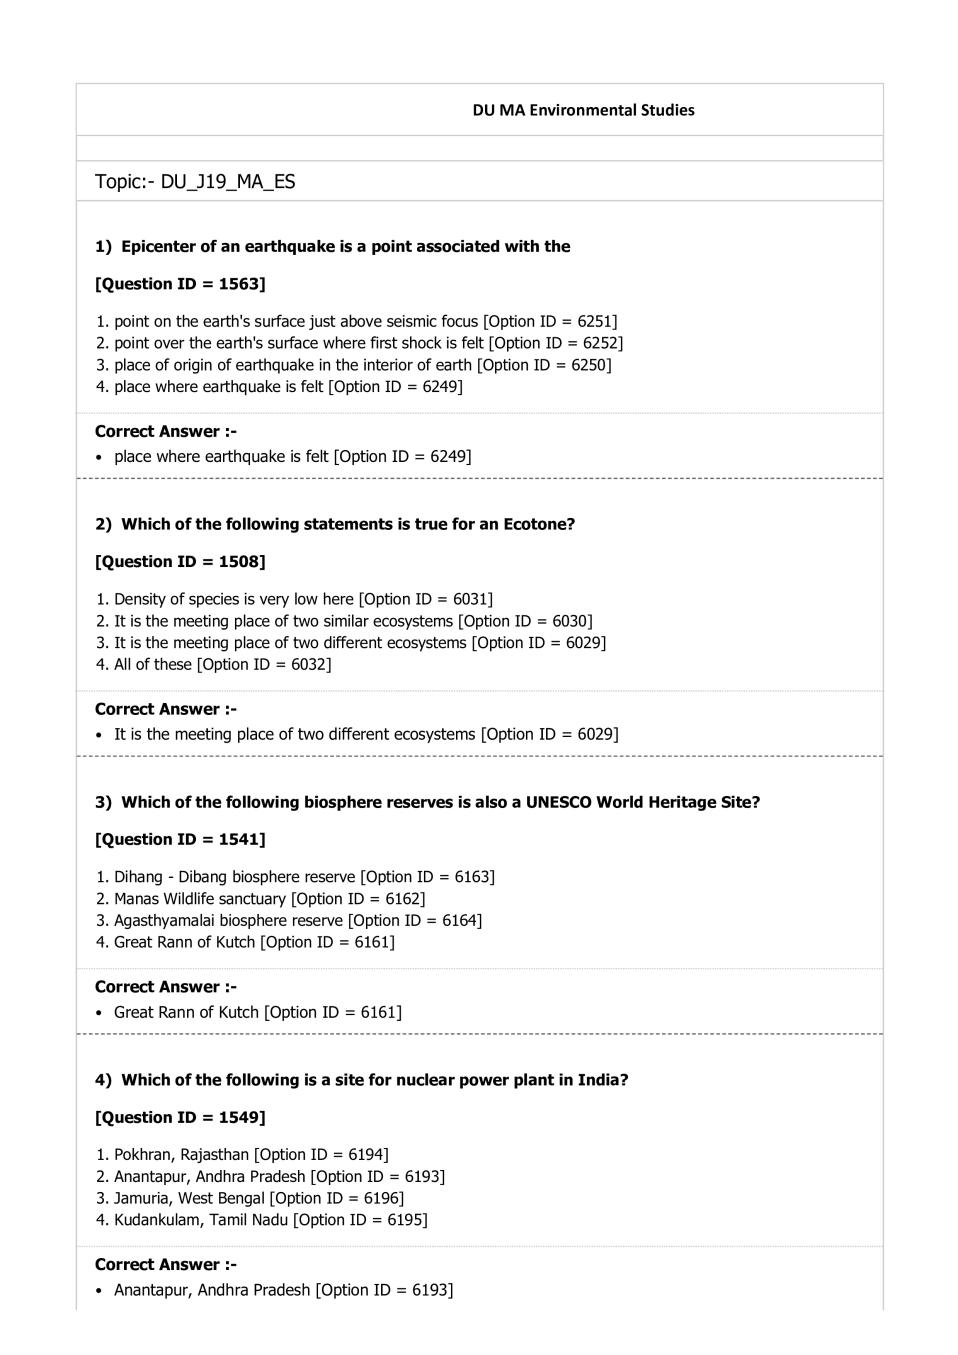 DUET Question Paper 2019 for MA Environmental Studies - Page 1